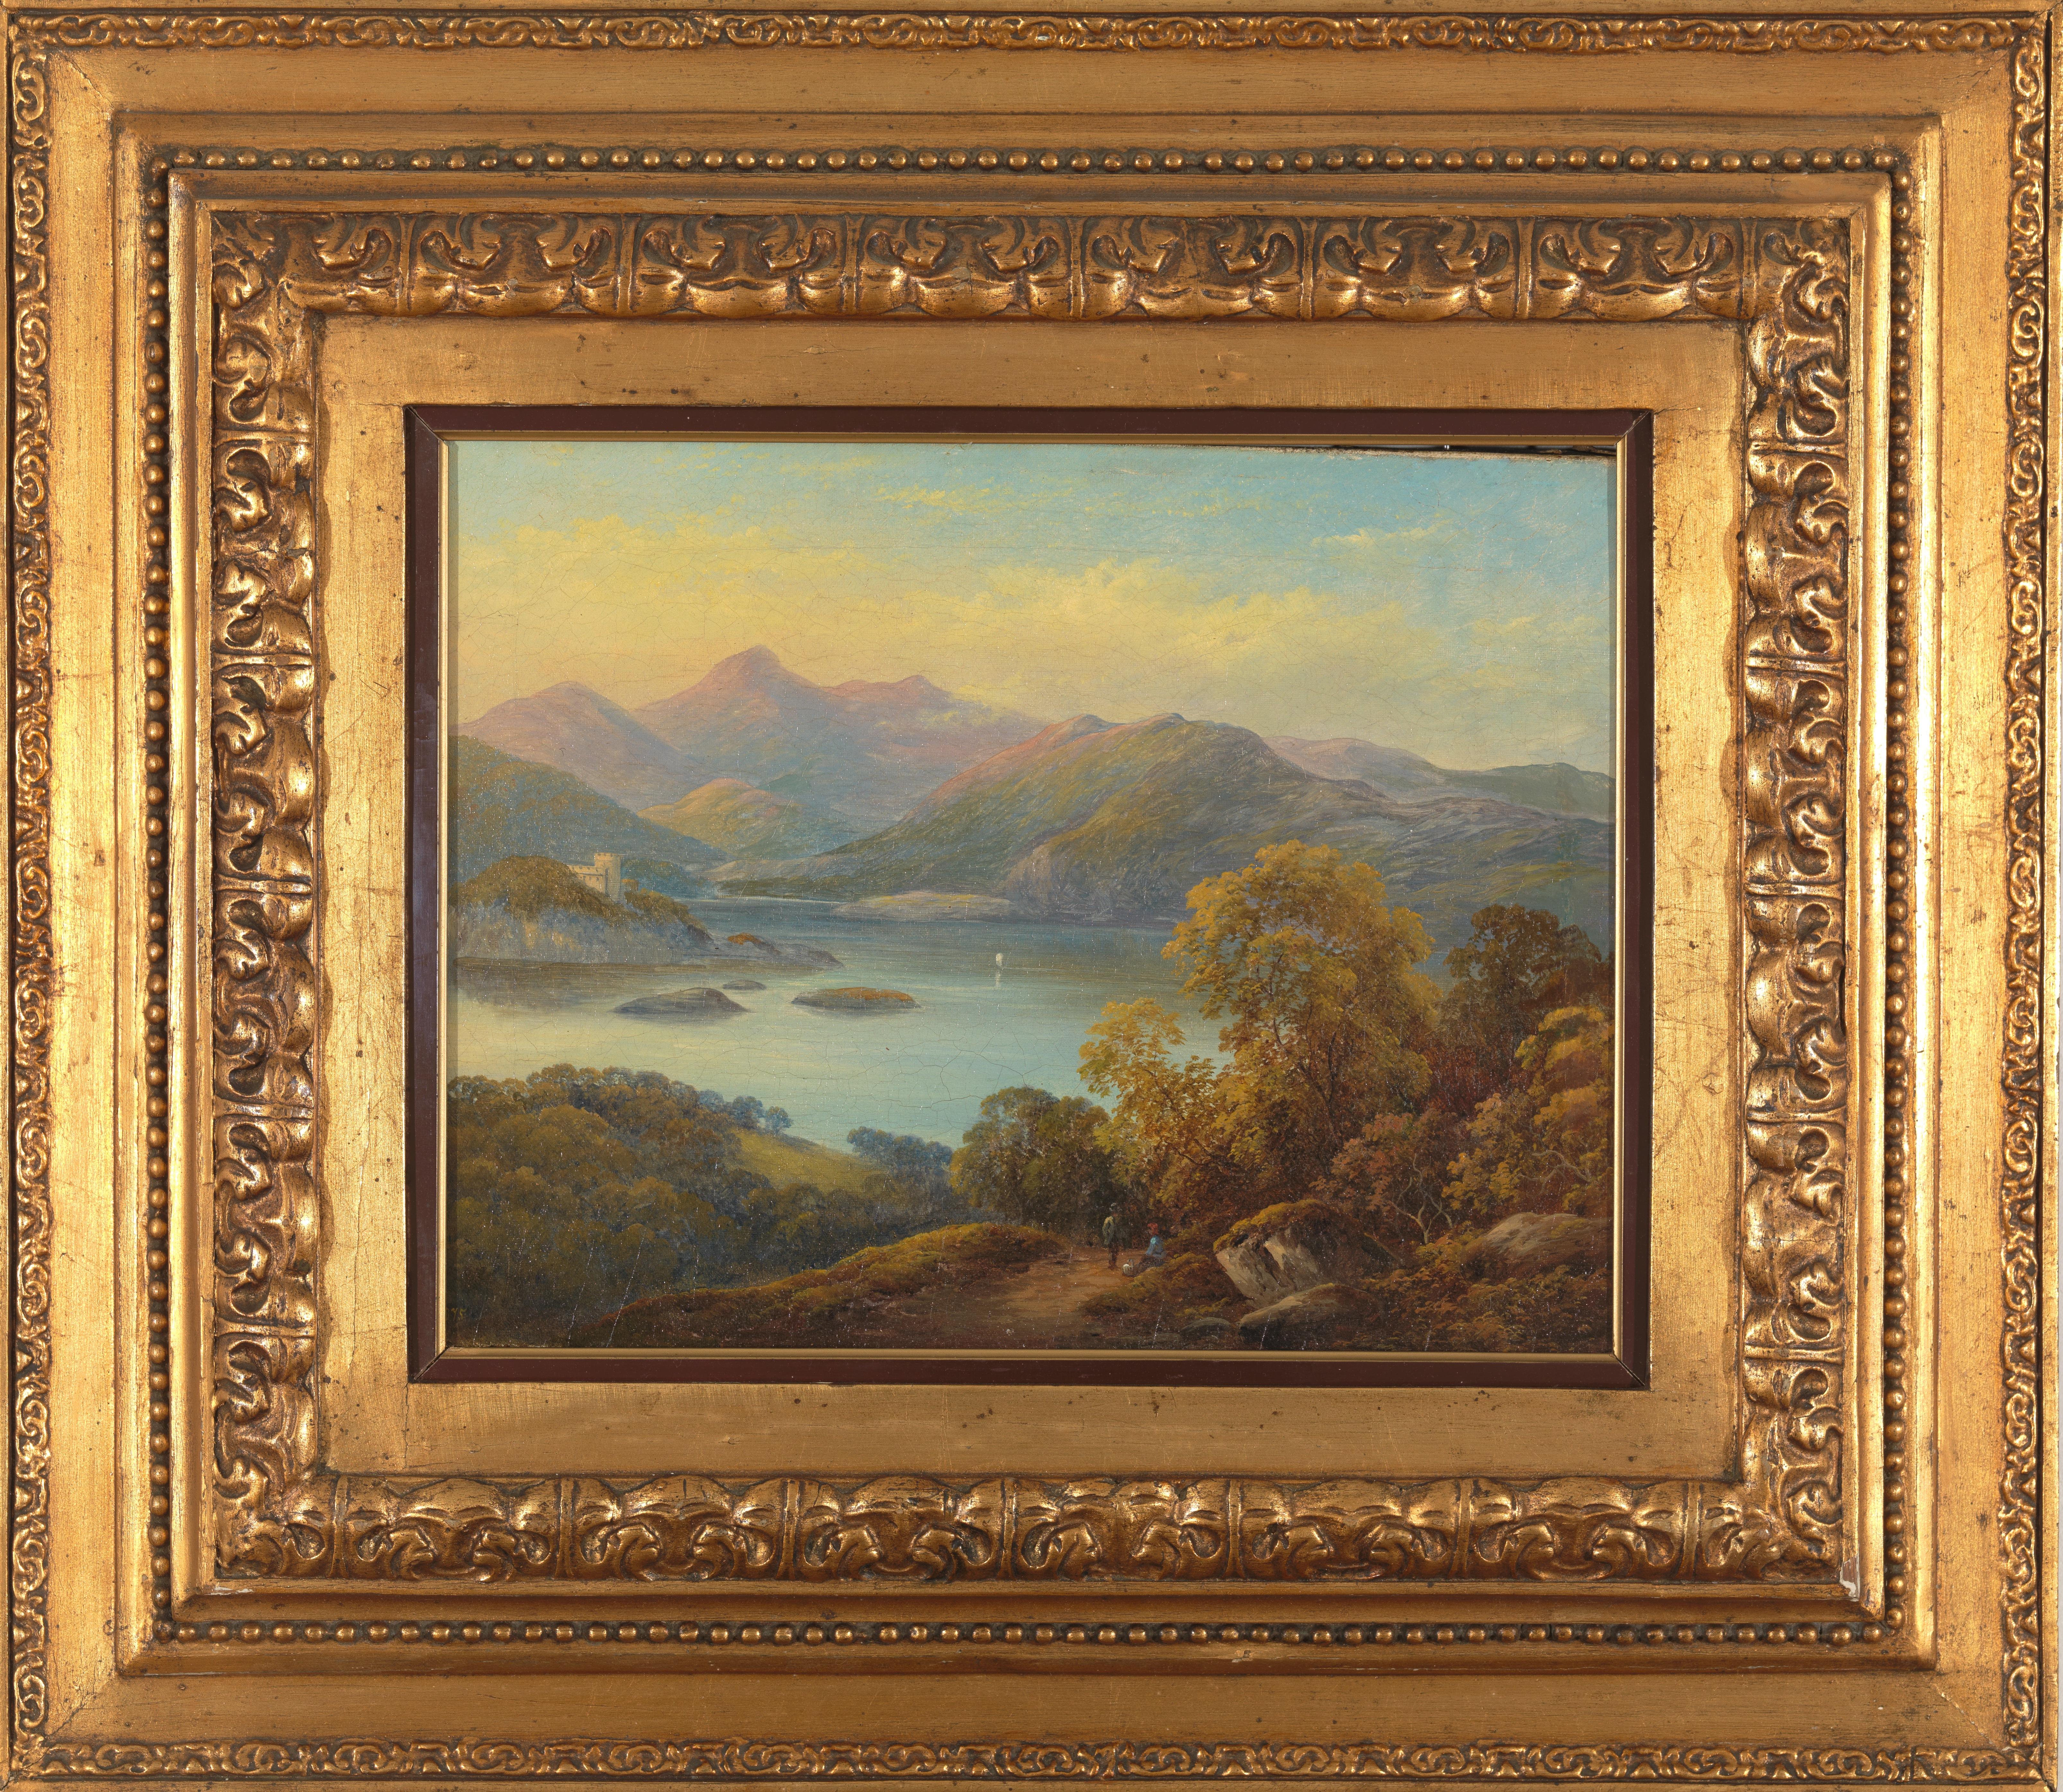 This 19th century Italian painting depicts a mountainous landscape. The romantic movement that made its entrance in this century had intensified the existing interest in landscape art and more specific rural, wild and distant sceneries. The